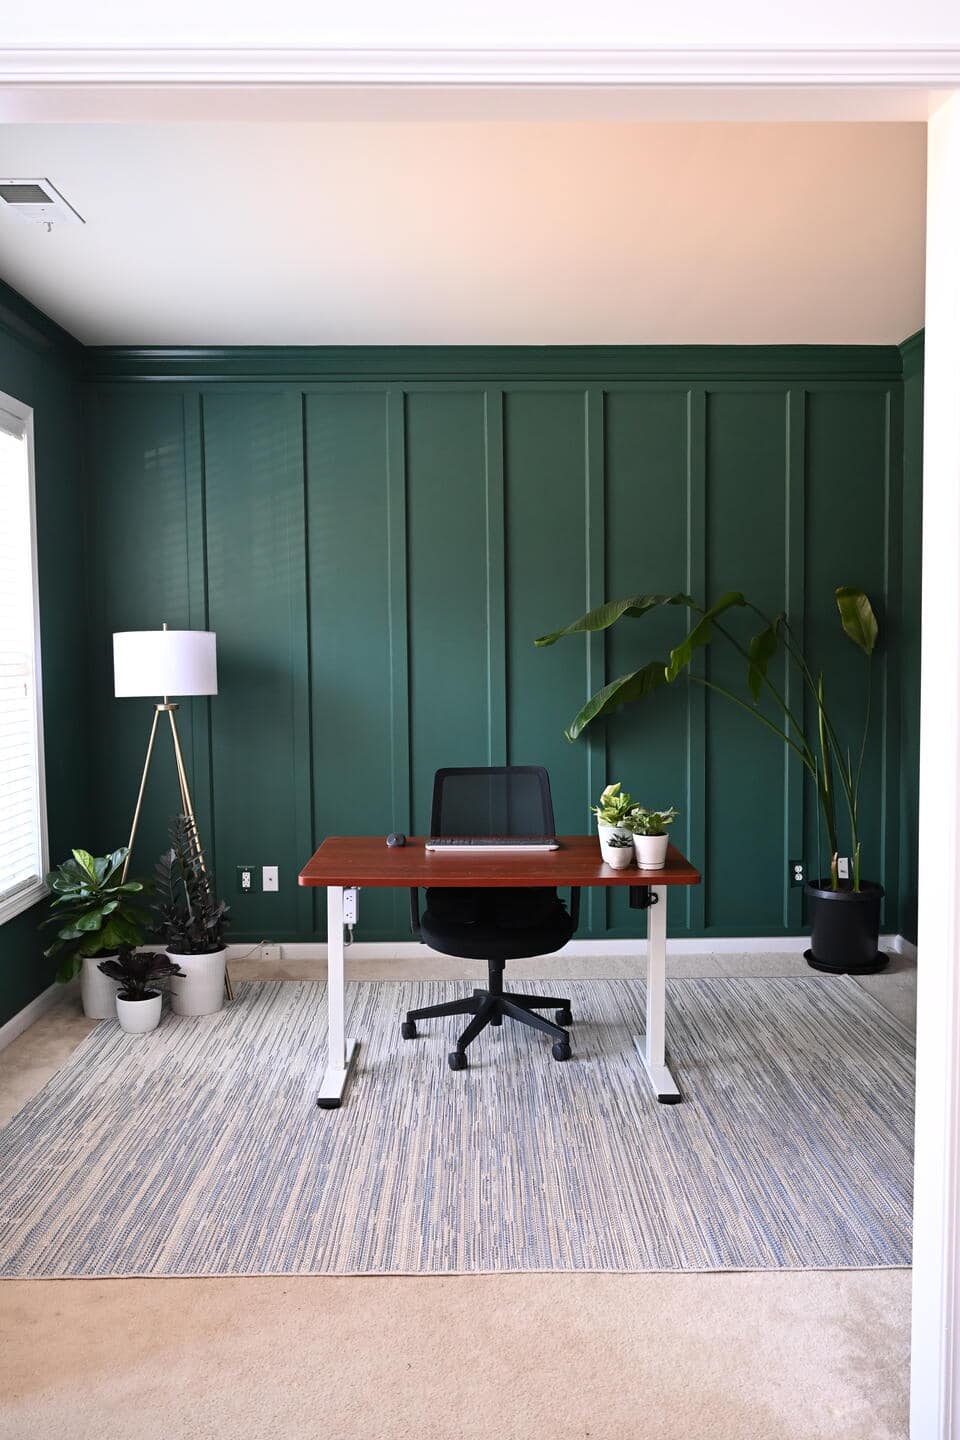 The office after the renovations, featuring a dark green moody wall, a desk in the center of the room with plants surrounding the room’s perimeter. An area rug covers the floor and helps to divide up the office into purposeful sections.